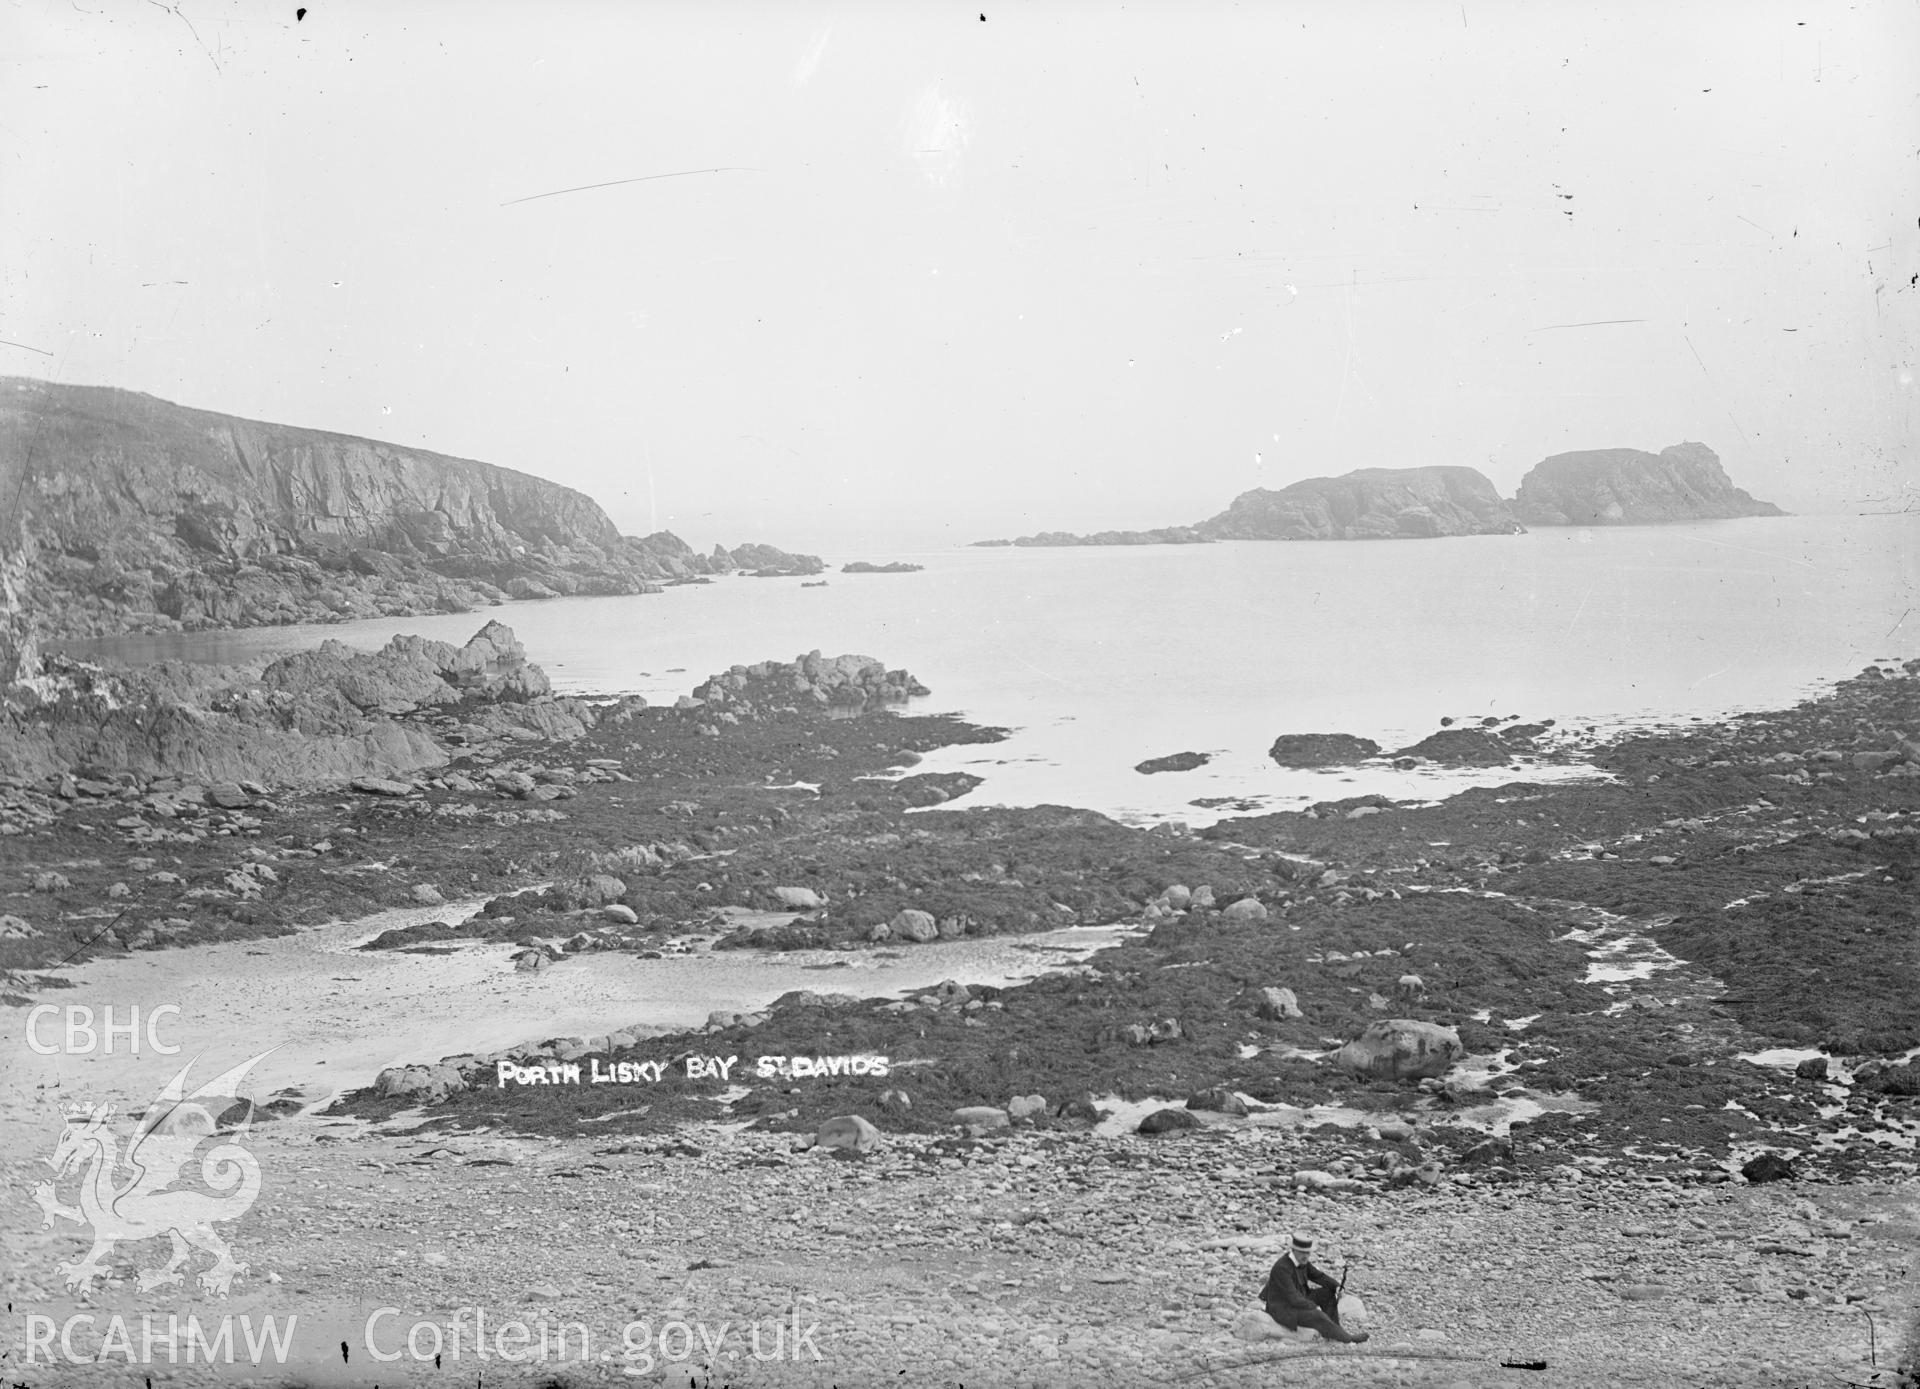 Black and white glass negative showing figure on the beach at Porth Lisky bay at St Davids.